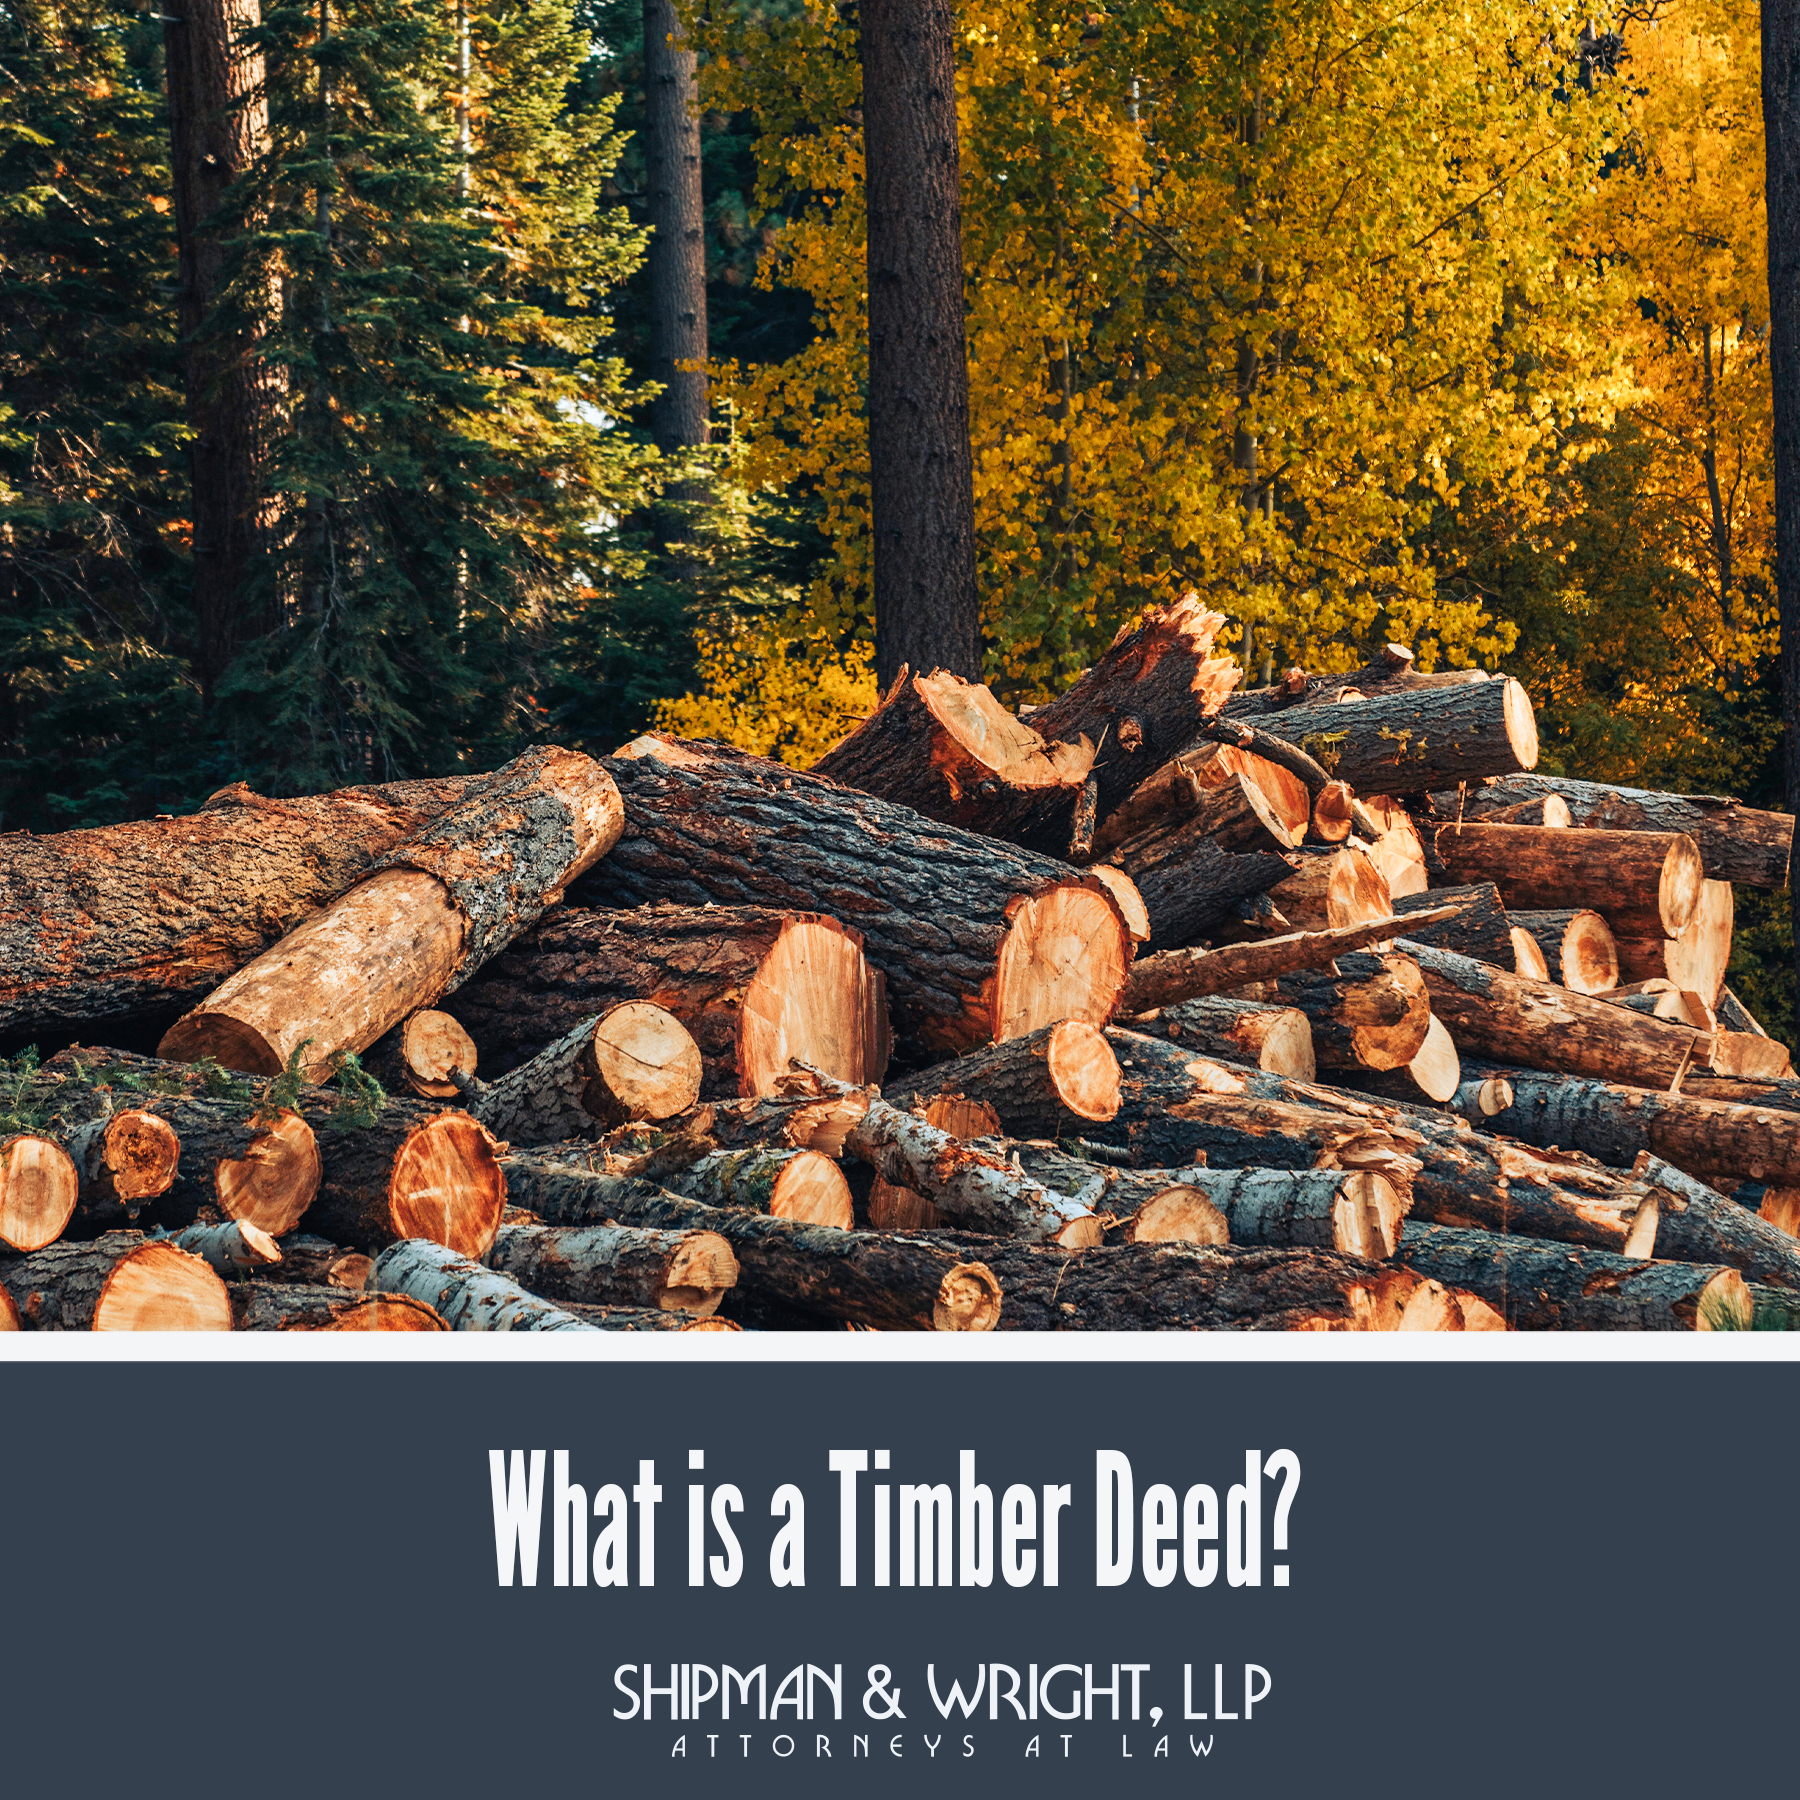 What is a Timber Deed?